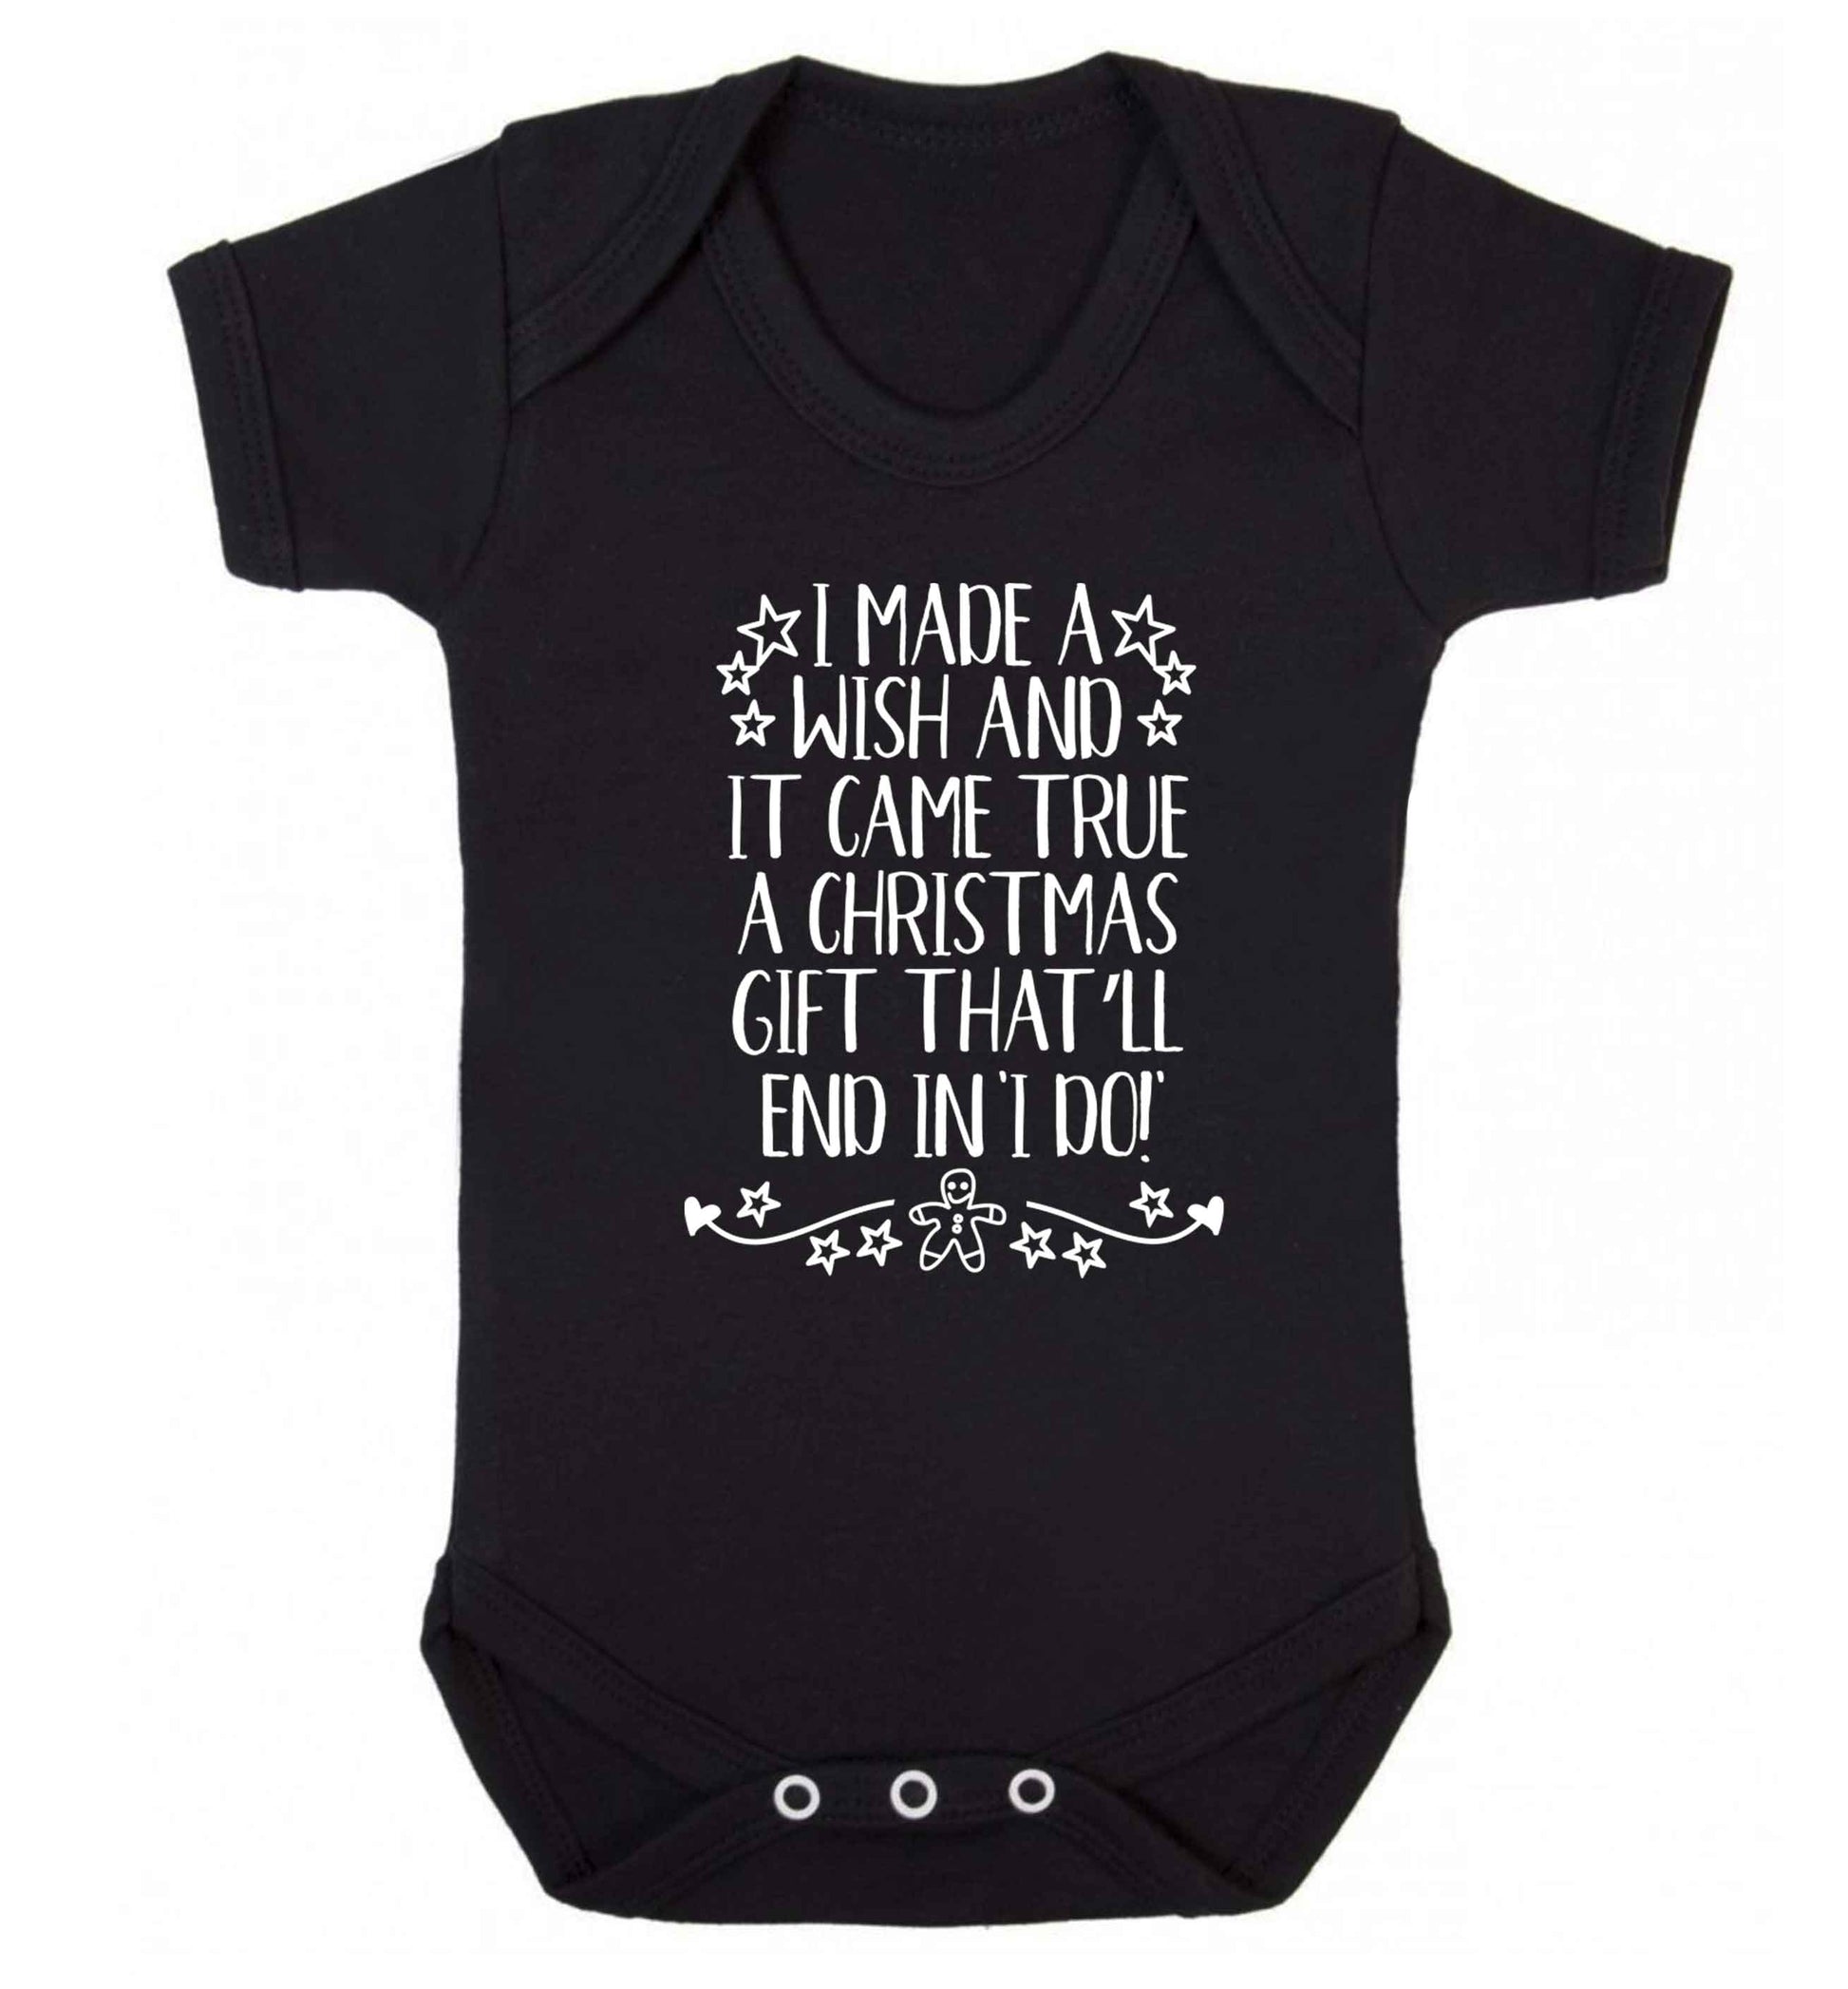 I made a wish and it came true a Christmas gift that'll end in 'I do' Baby Vest black 18-24 months